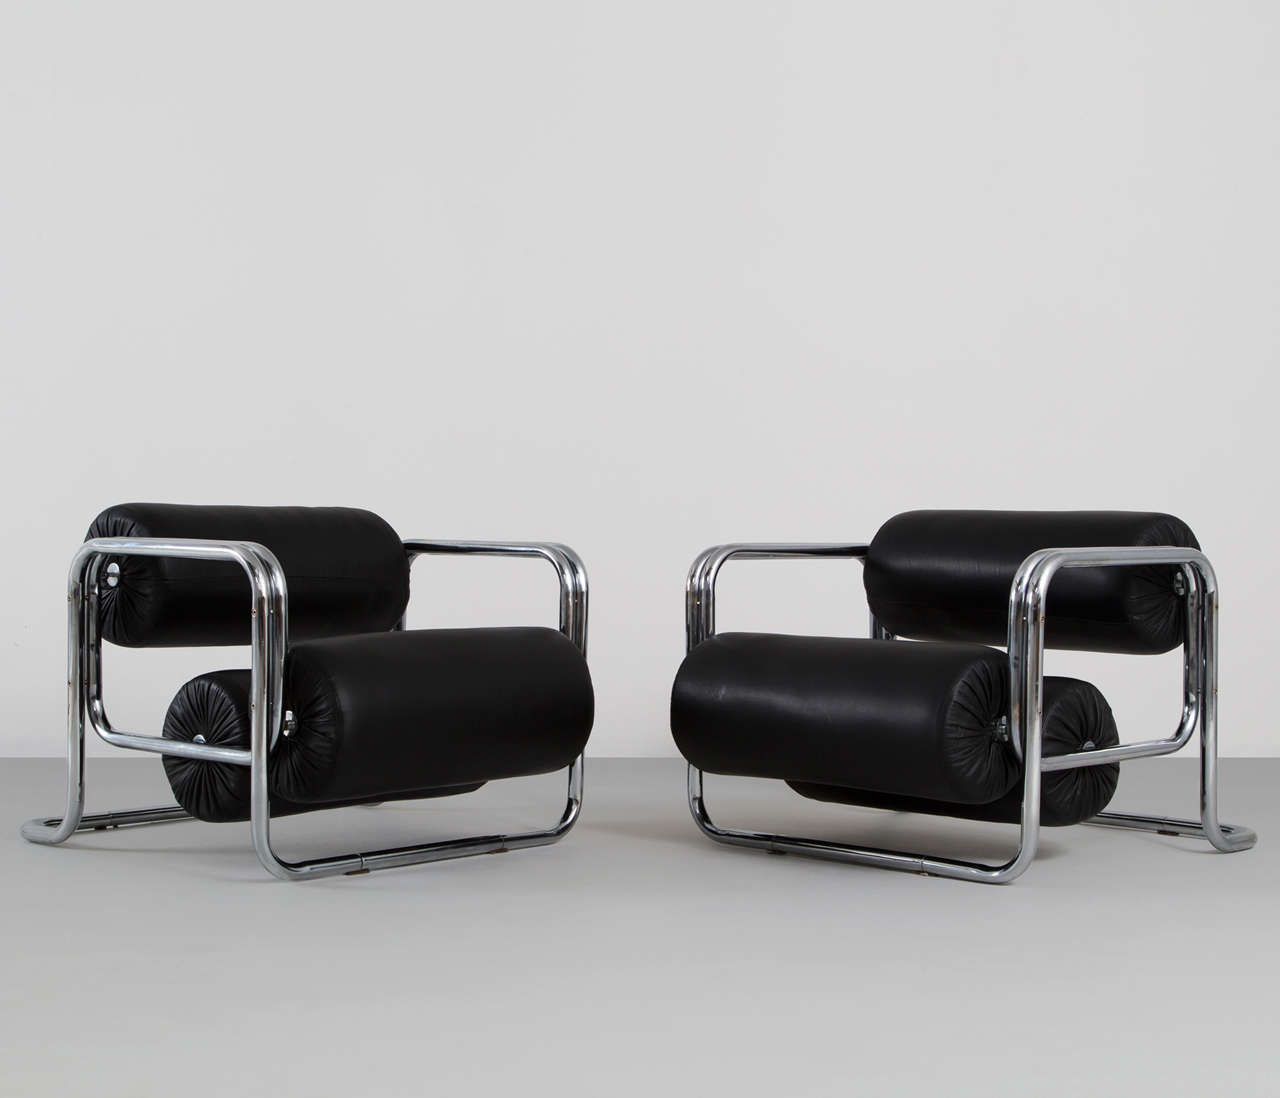 Pair of easy chairs, in steel and leather, Germany 1960s. 

Interesting pair of tubular armchairs with black leather upholstery. The frame consist of bended tubular steel. Seating and back are made of large 'rolls' upholstered in leather. The